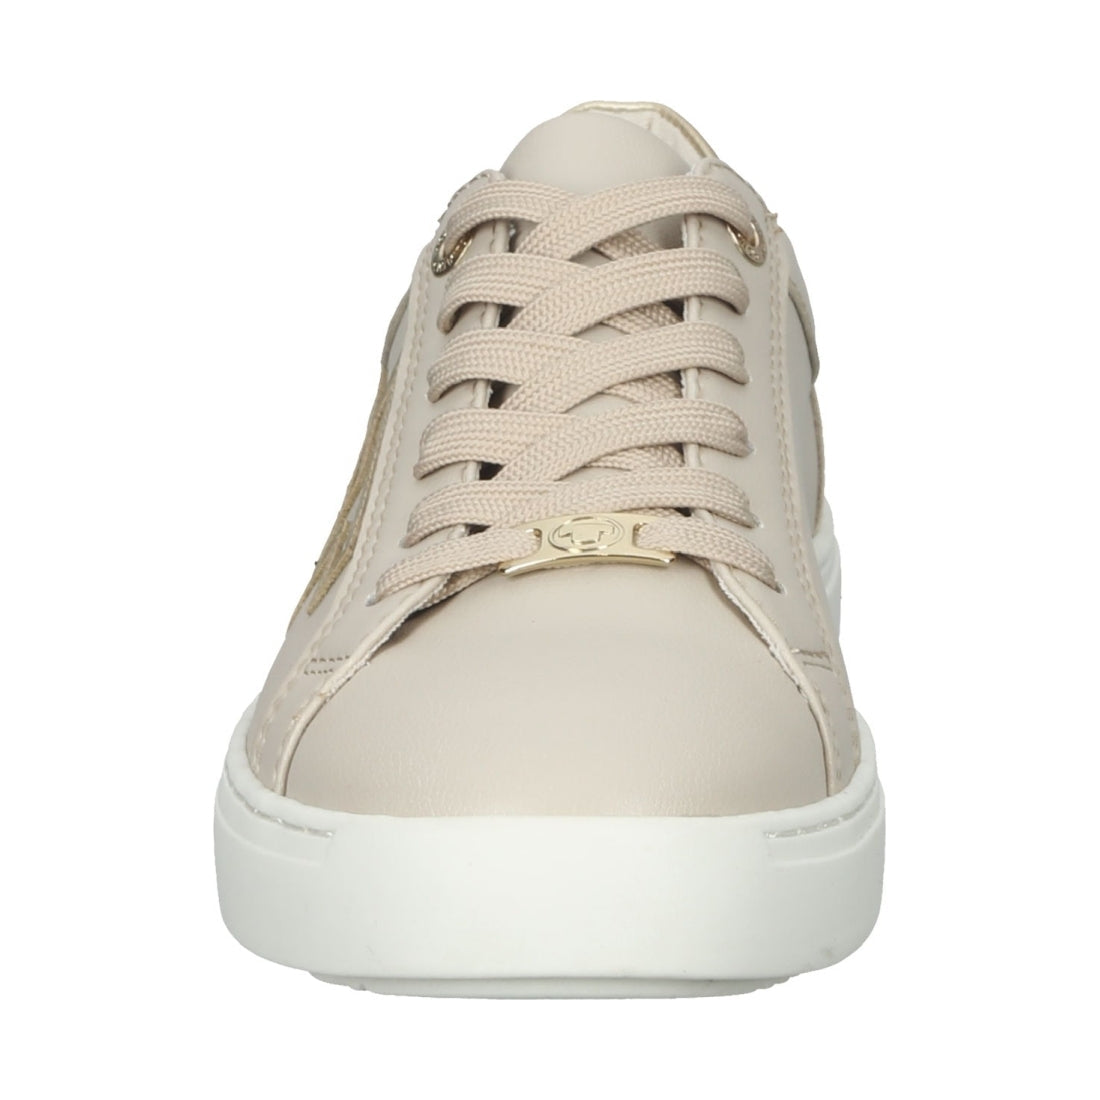 Tom Tailor Womens beige casual closed shoes | Vilbury London